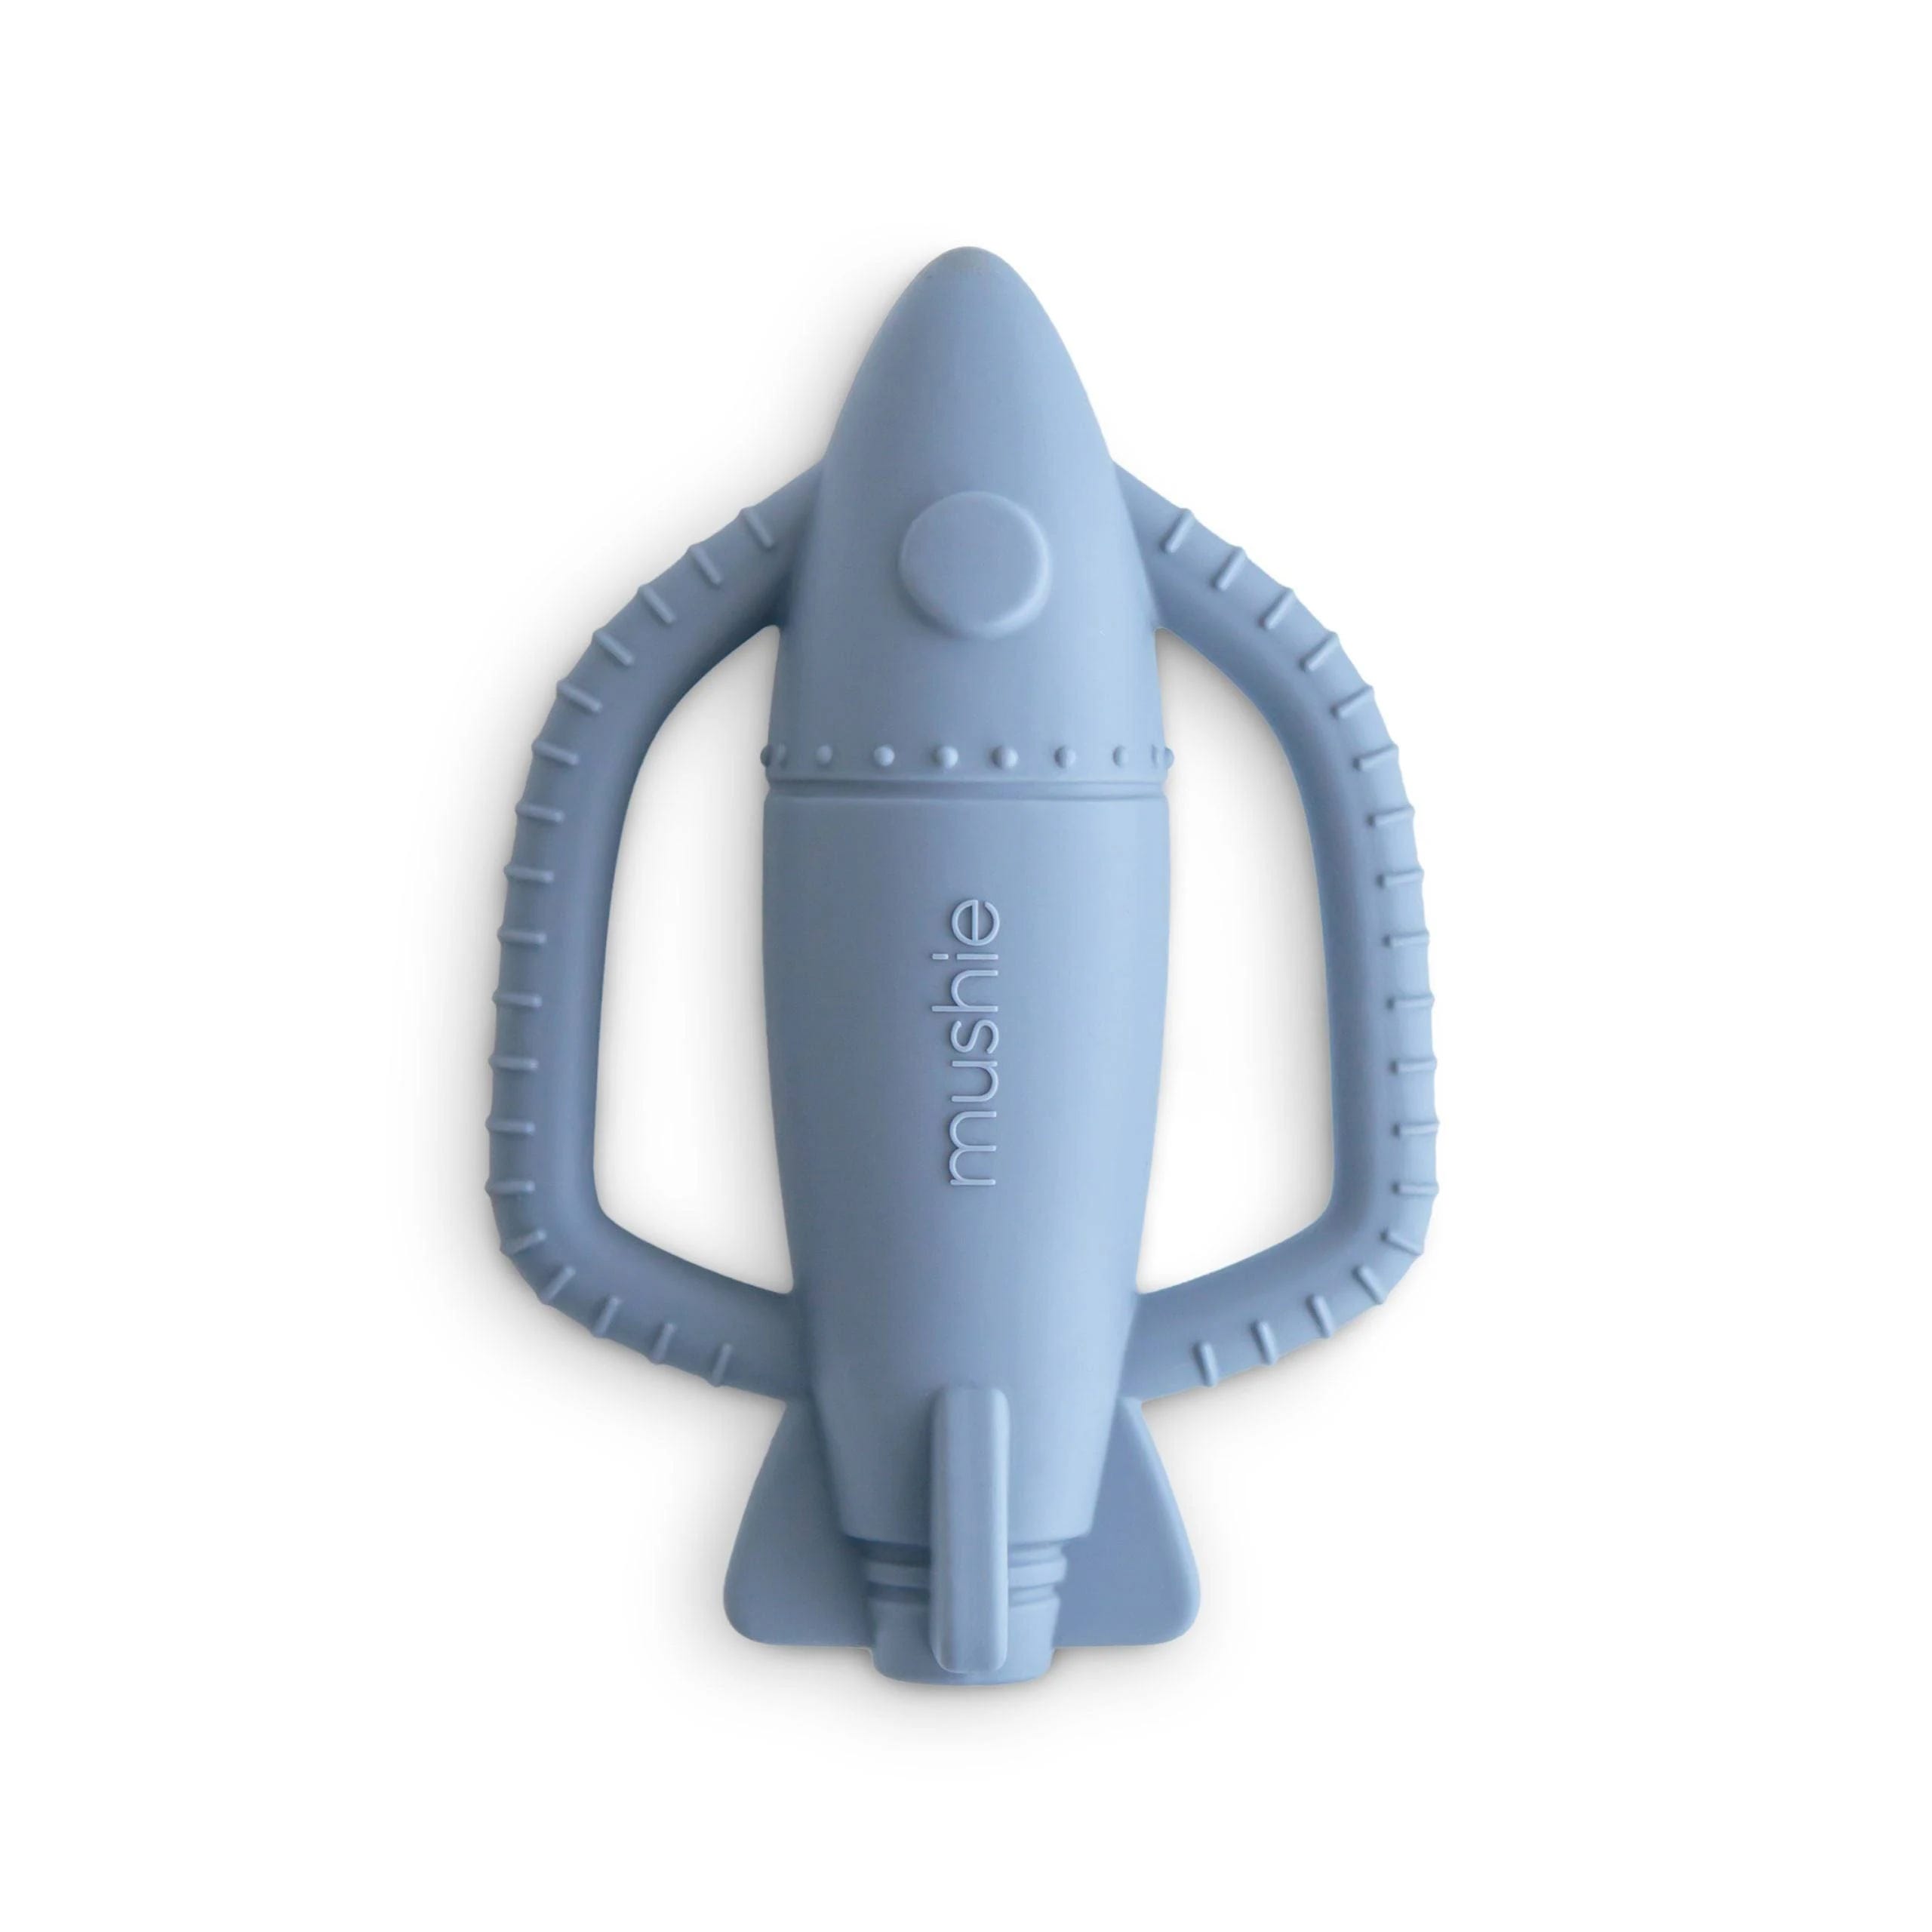 Rocket Rattle Teether for Baby: Safe, Non-Toxic, and Versatile | Image